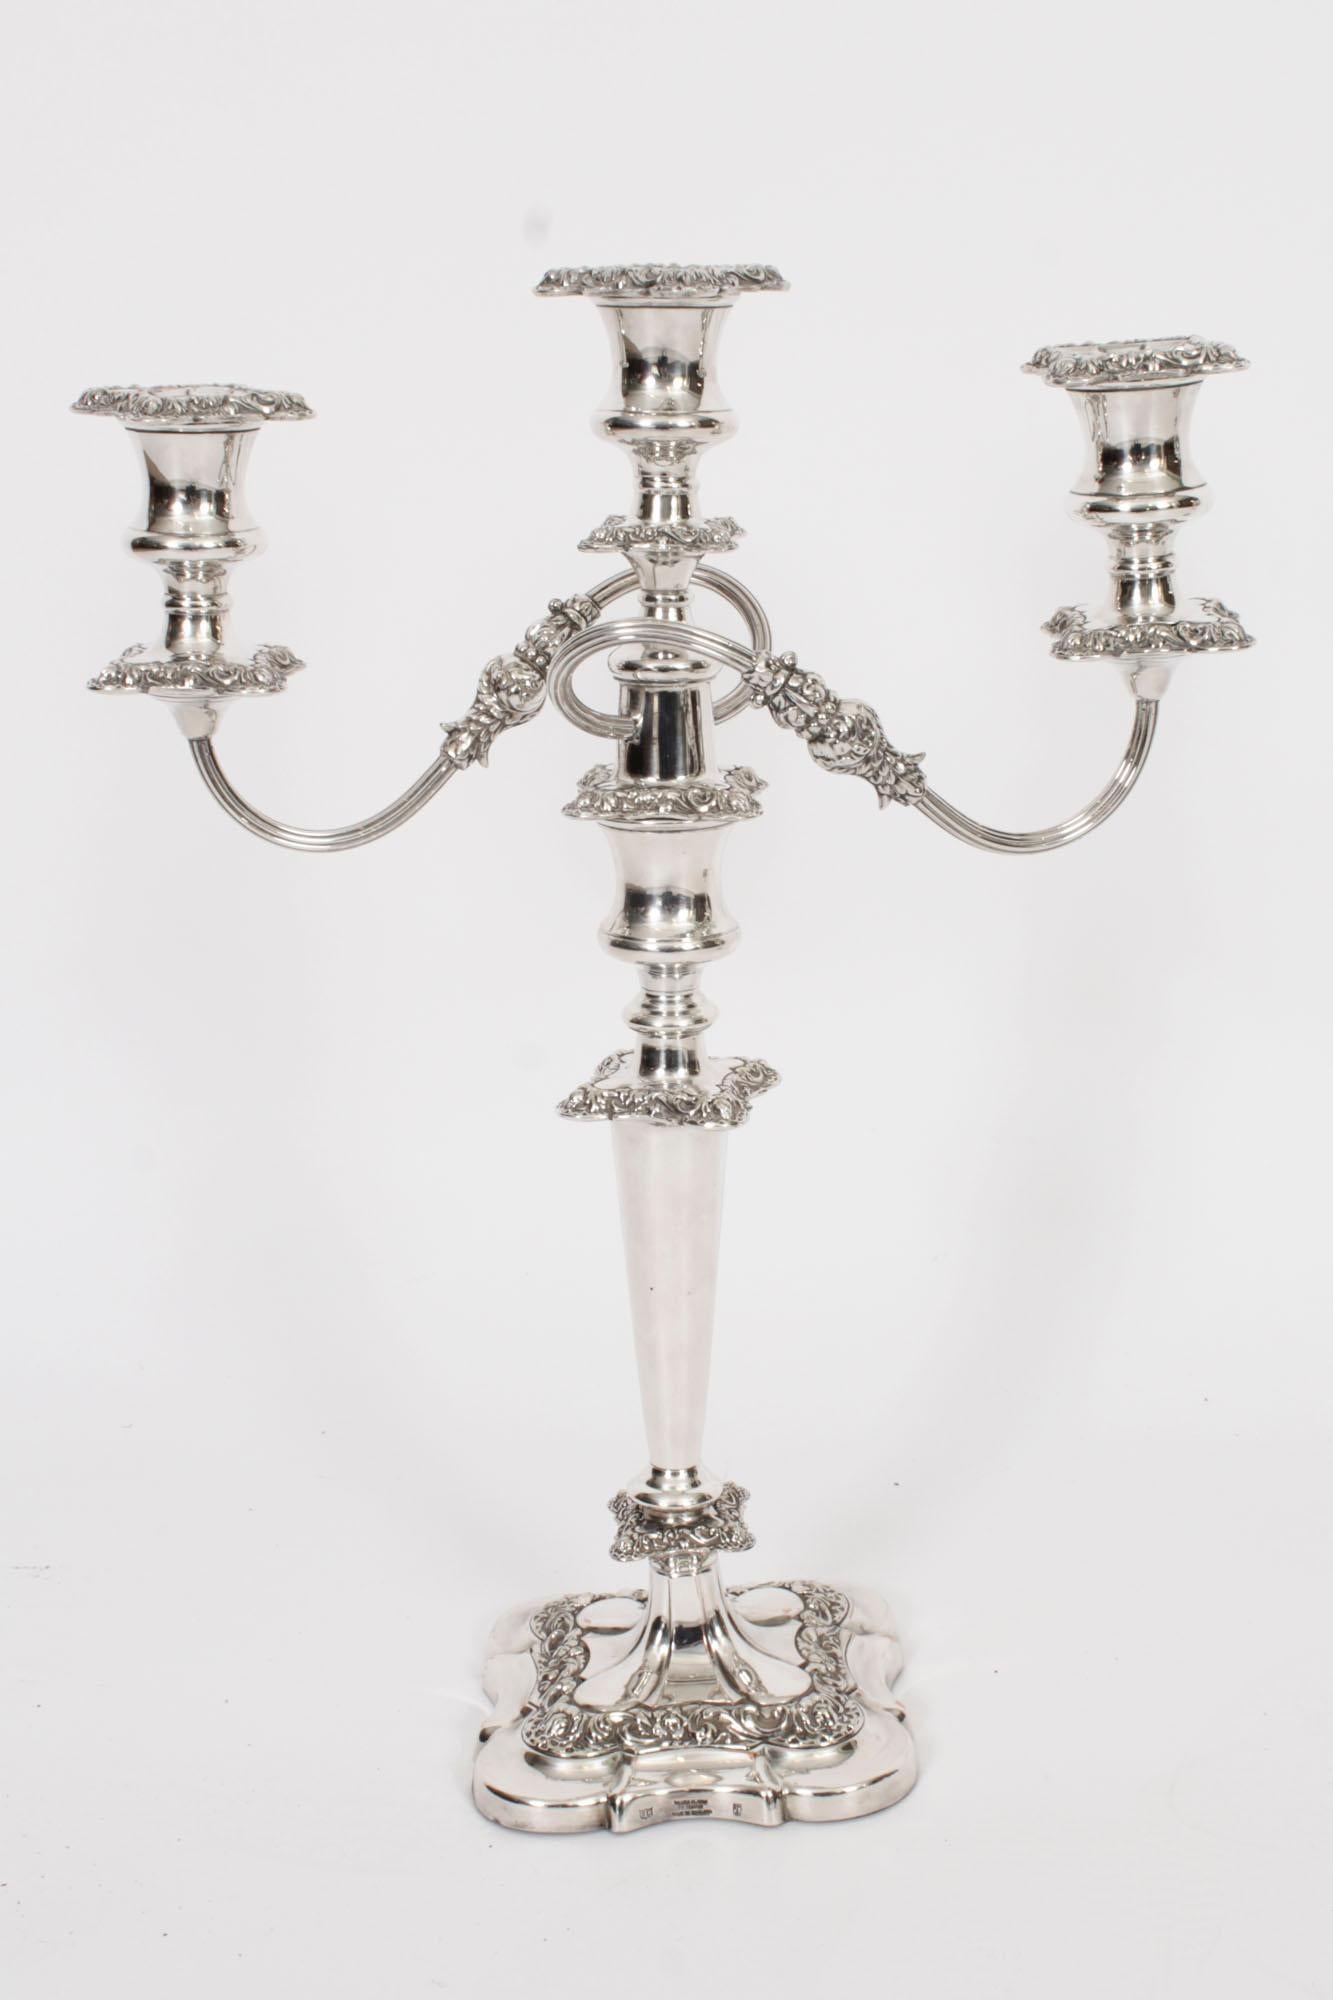 This is a magnificent high-quality pair of antique English silver plate on copper three-light candelabra, each bearing the maker's mark of the renowned silversmith, Stevenson & Law, circa 1920 in date.
 
Each candelabra features an impressive